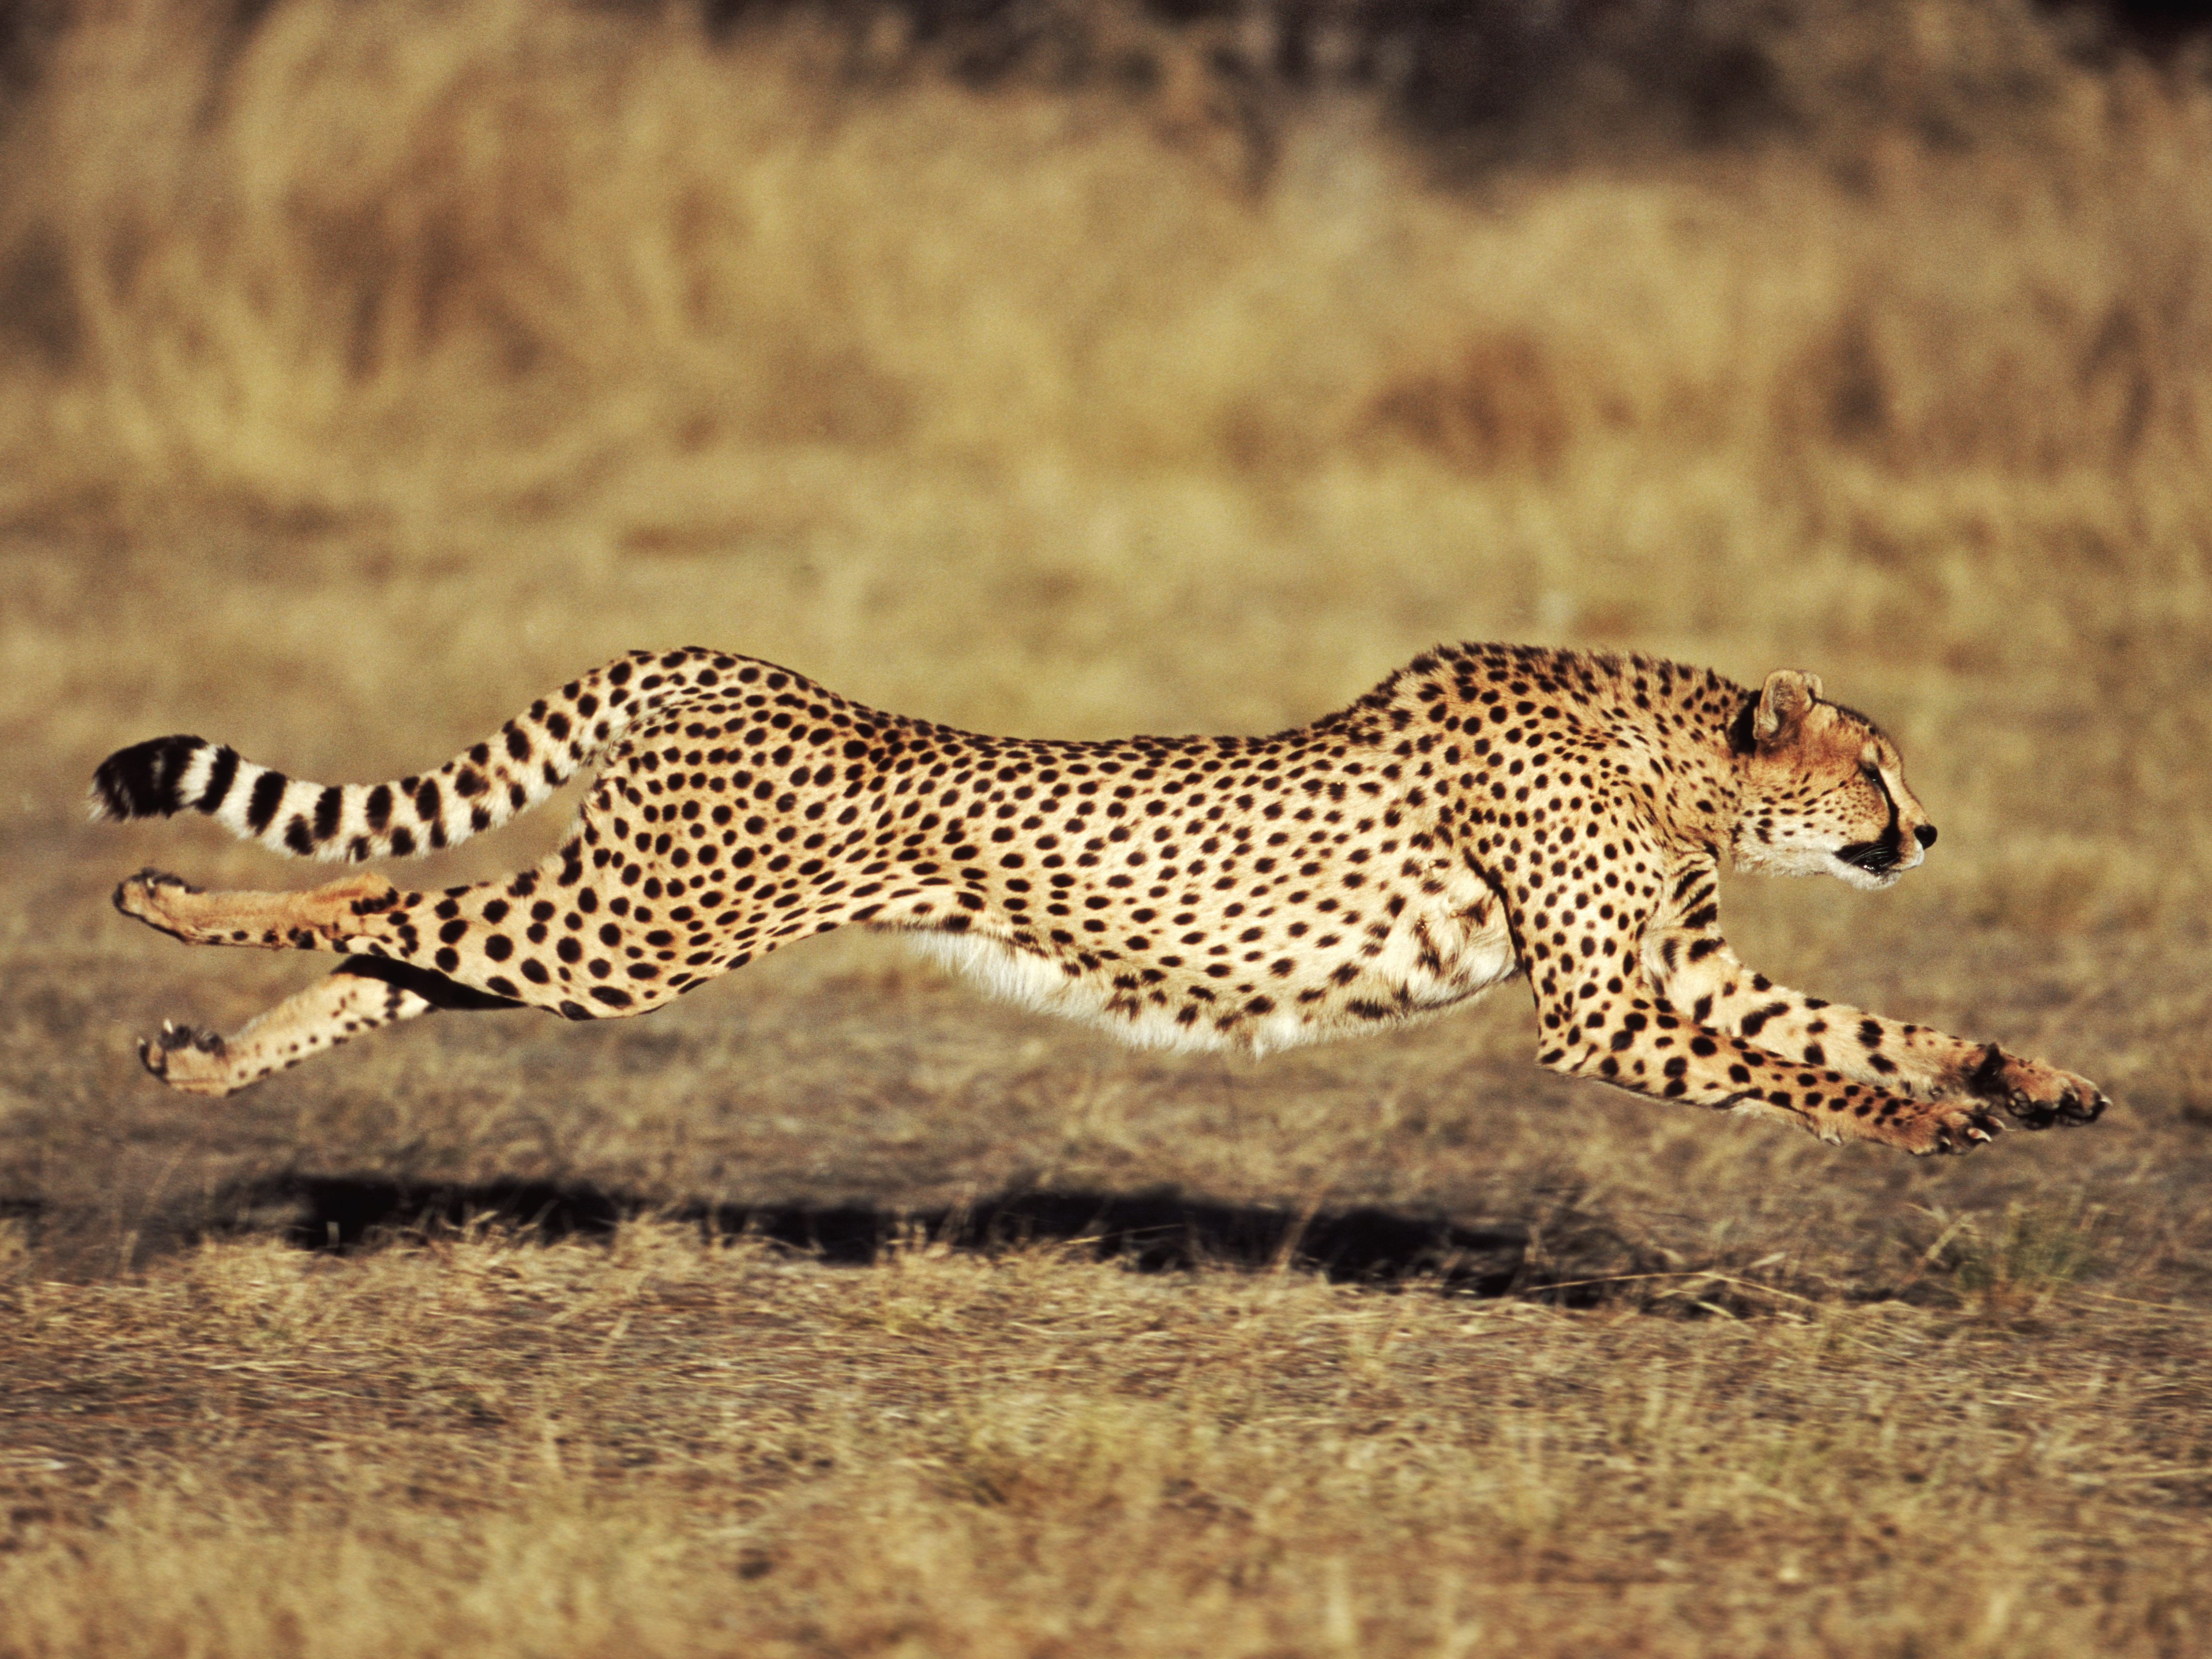 What is the fastest speed of a cheetah?